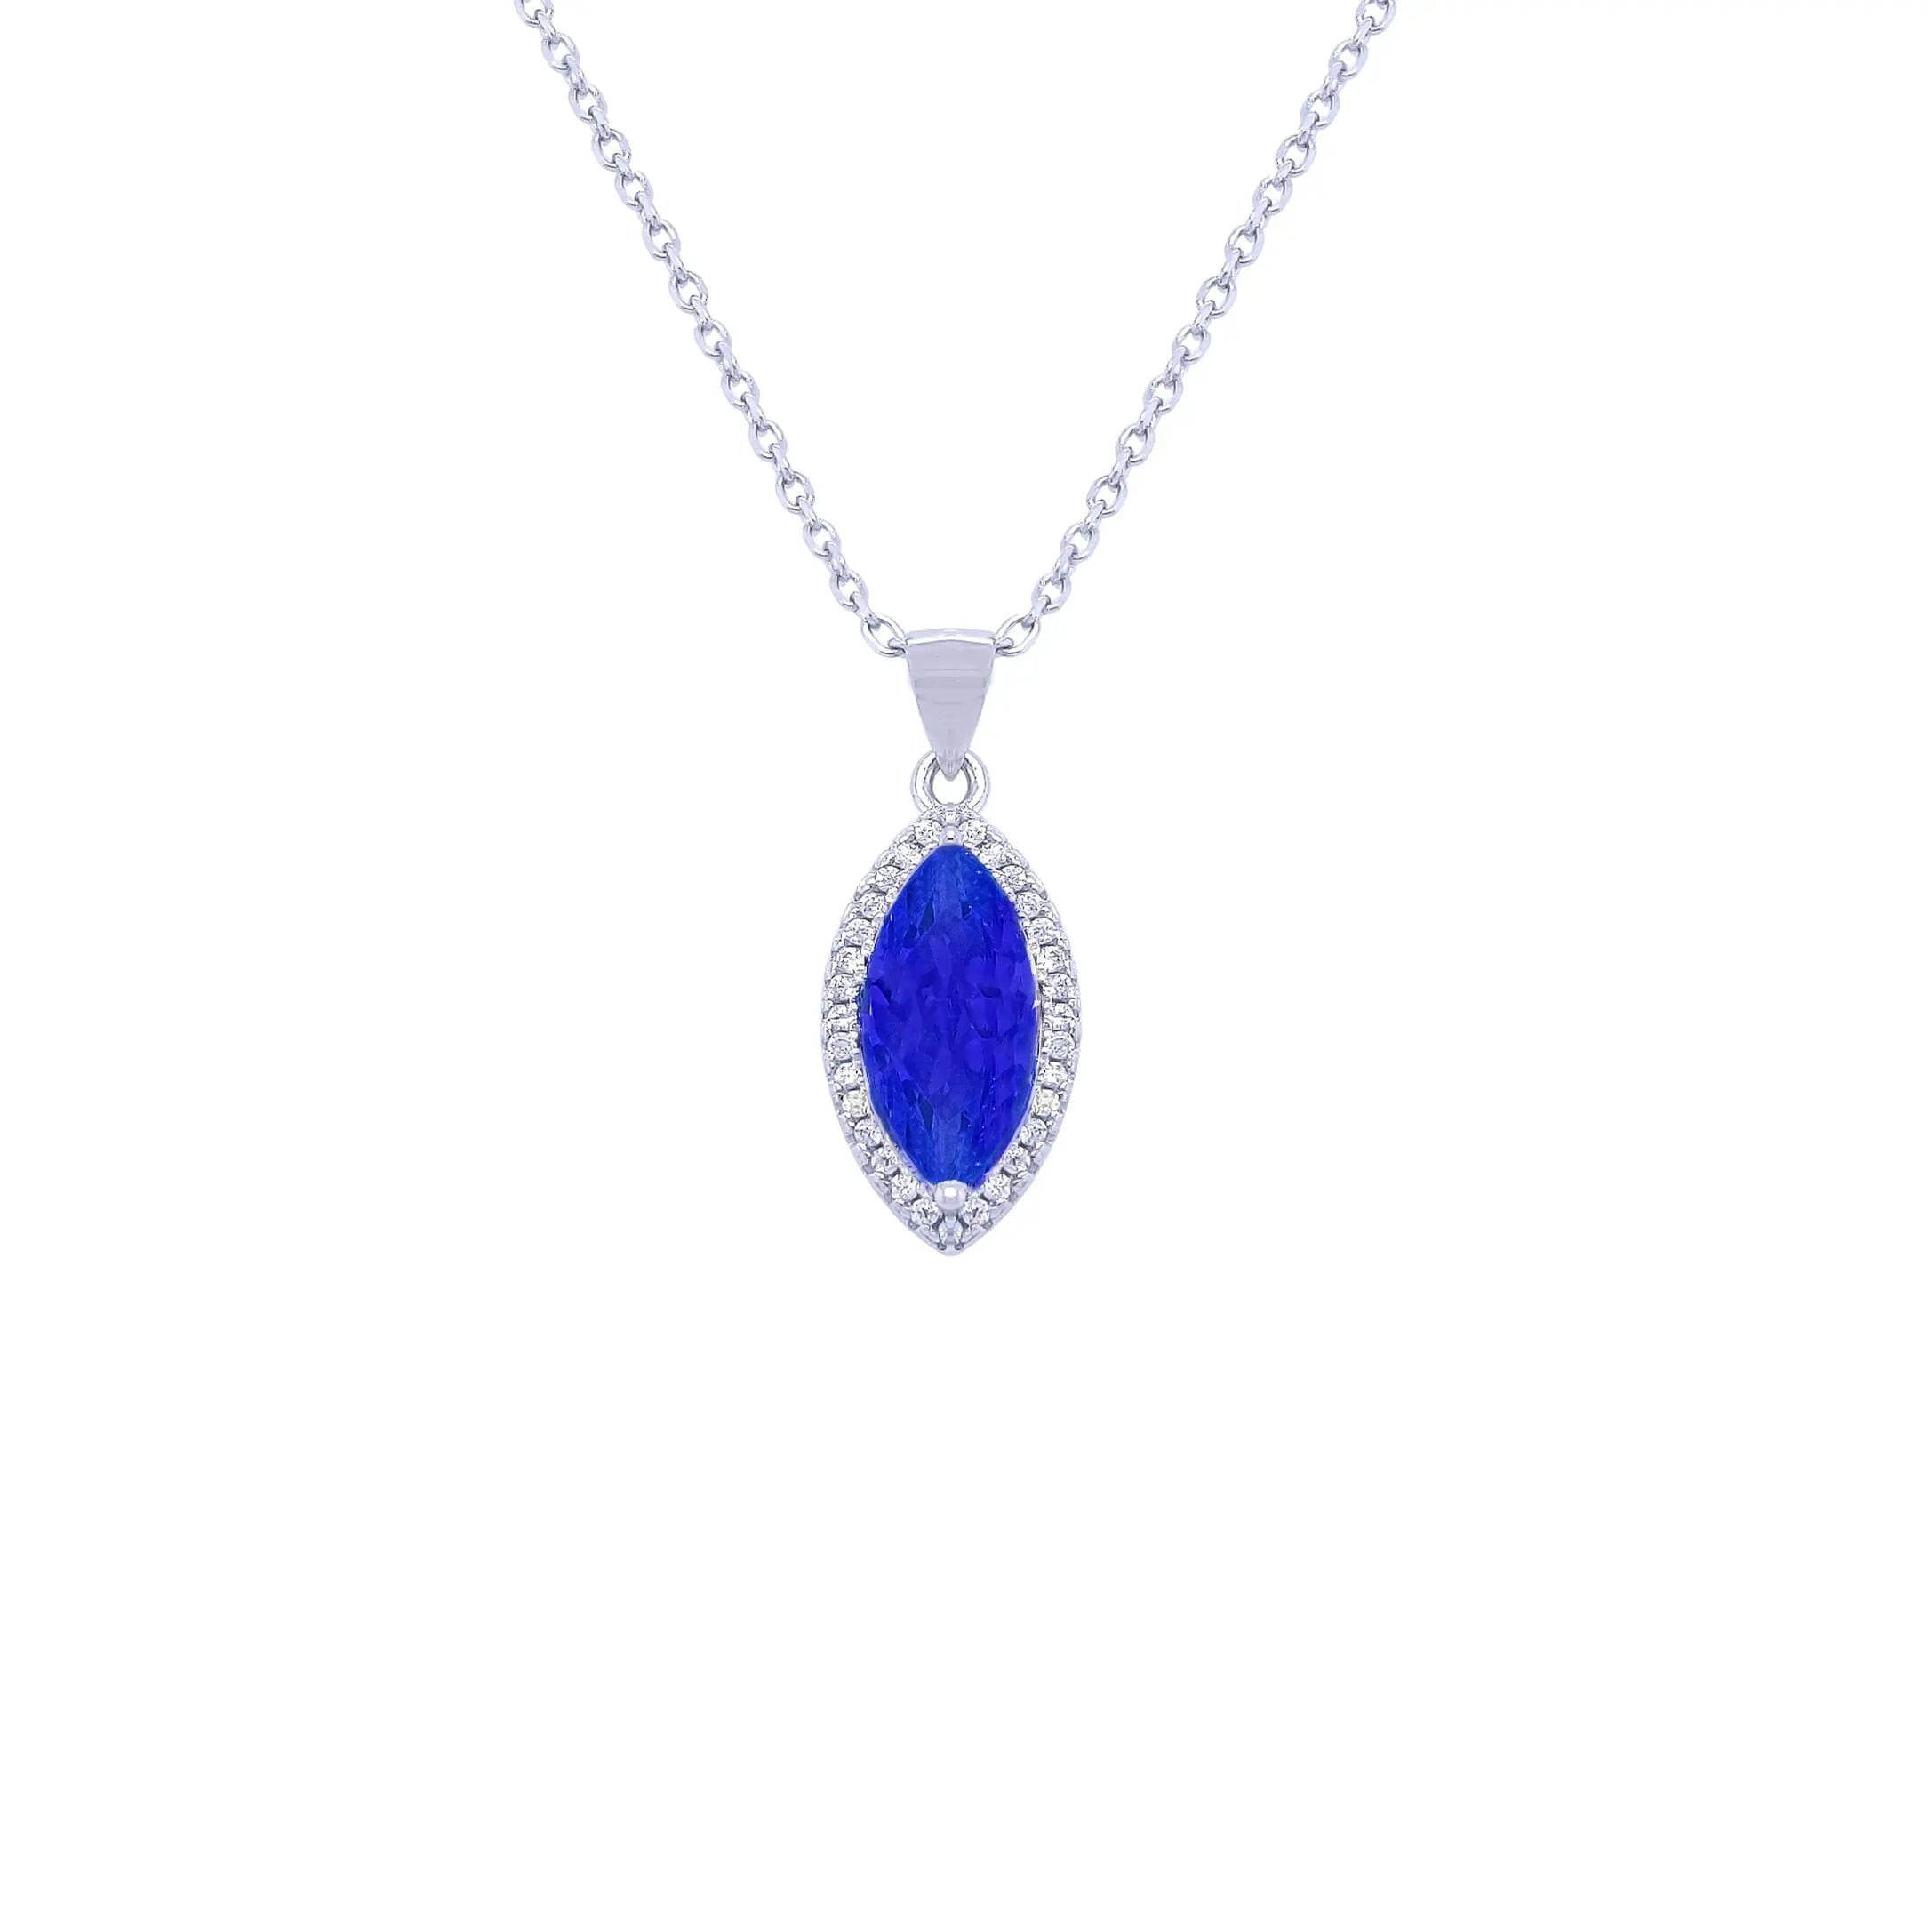 Silver Necklace Sterling 925 With Blue Zircon Stone-Necklaces-Asfour Crystal